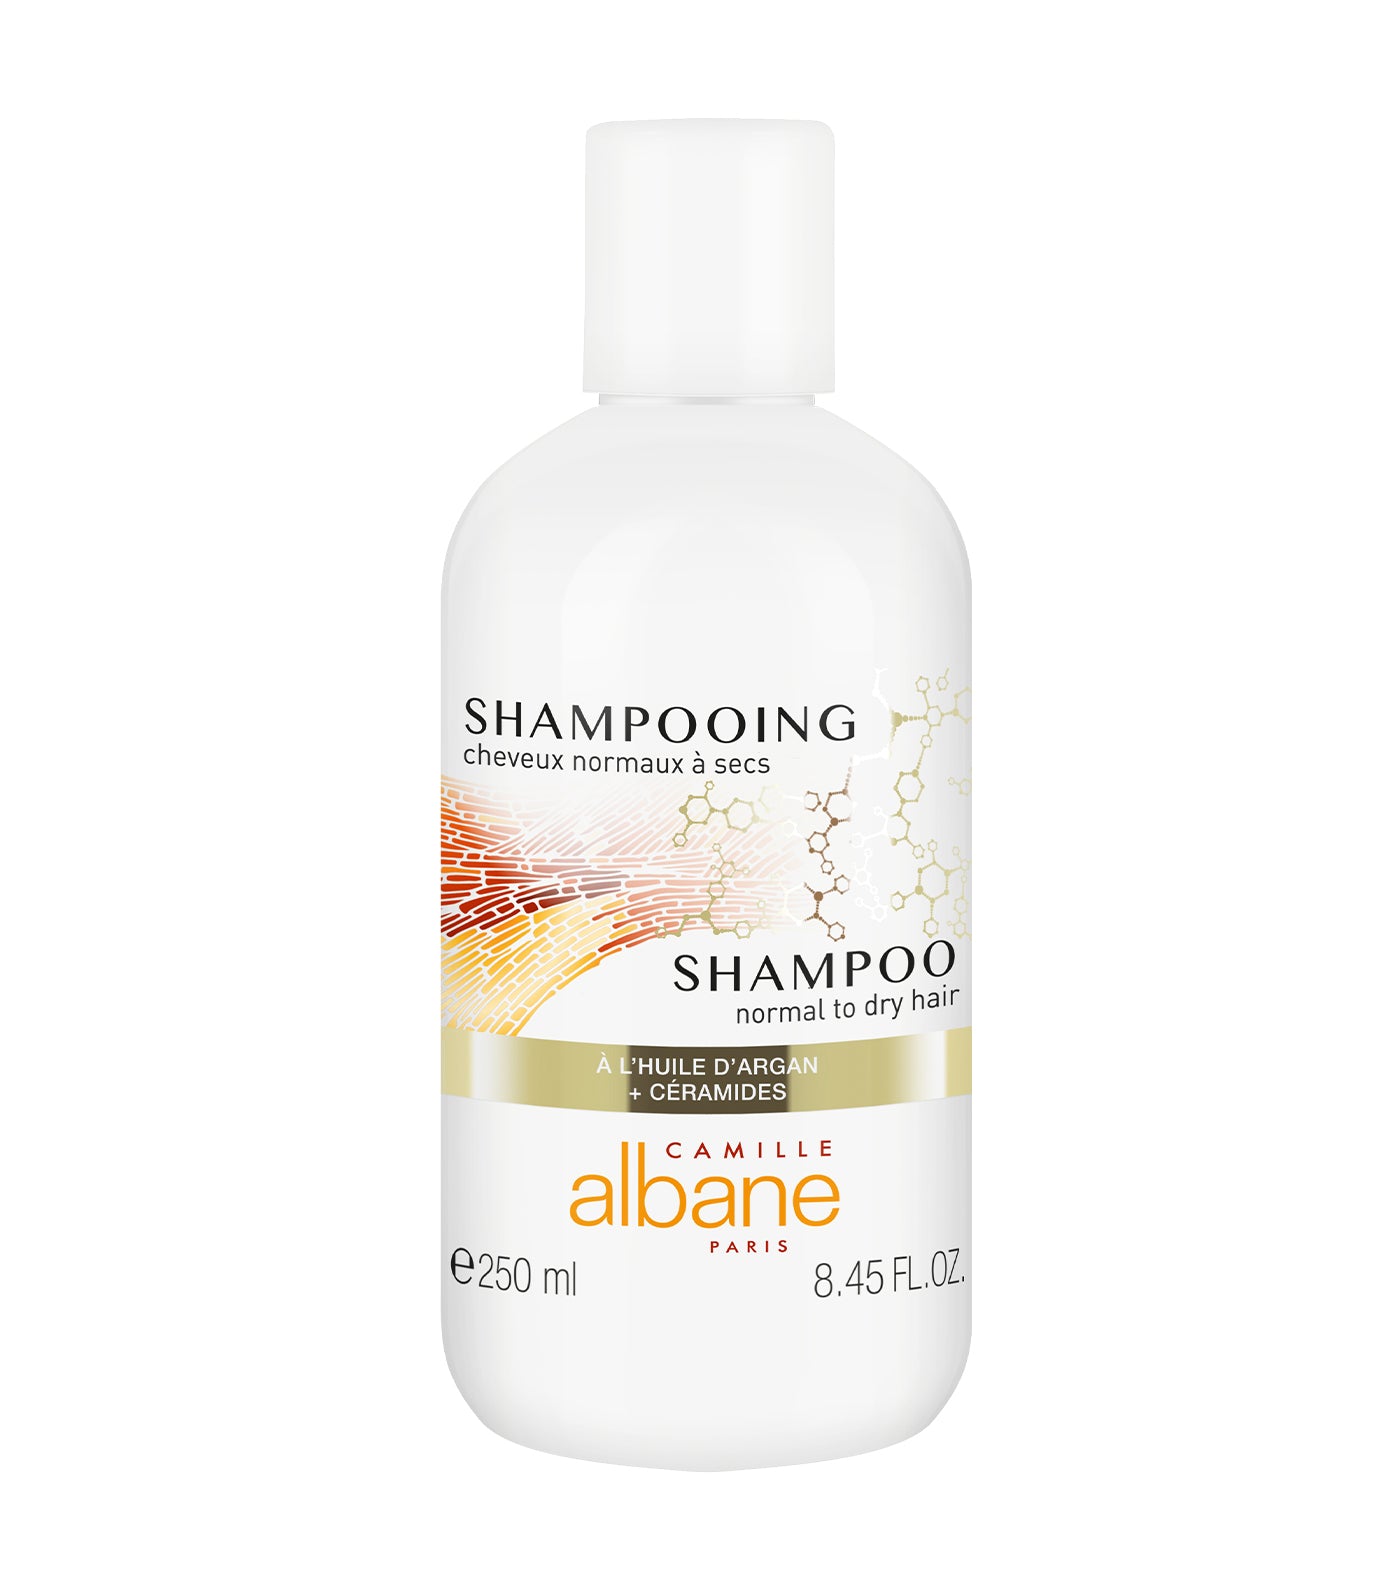 Camille Albane Paris Shampoo For Normal To Dry Hair